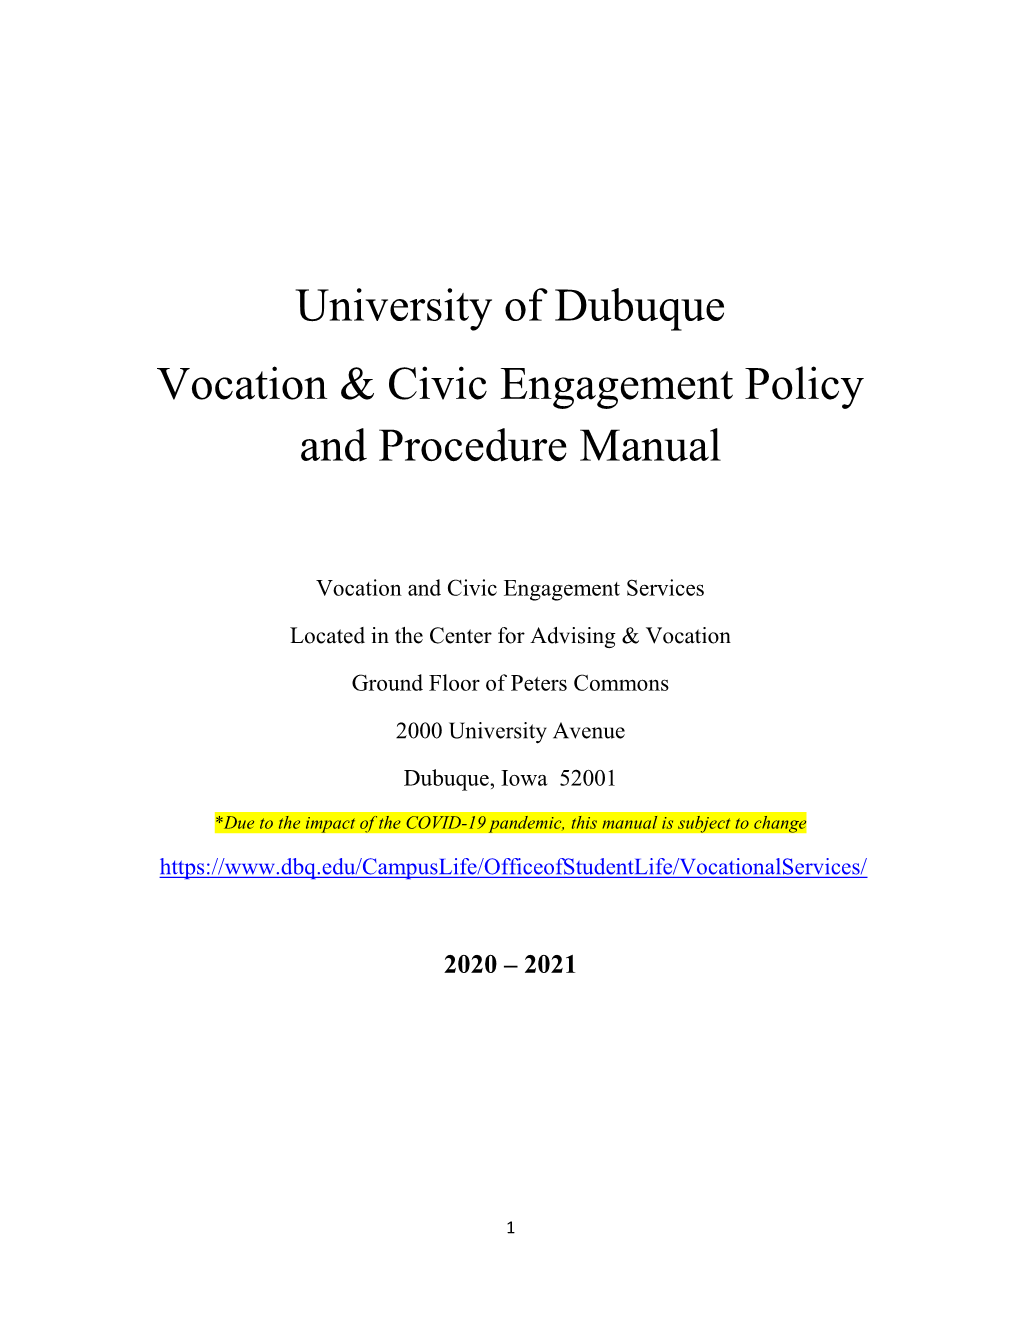 Vocation and Civic Engagement Policy and Procedure Manual